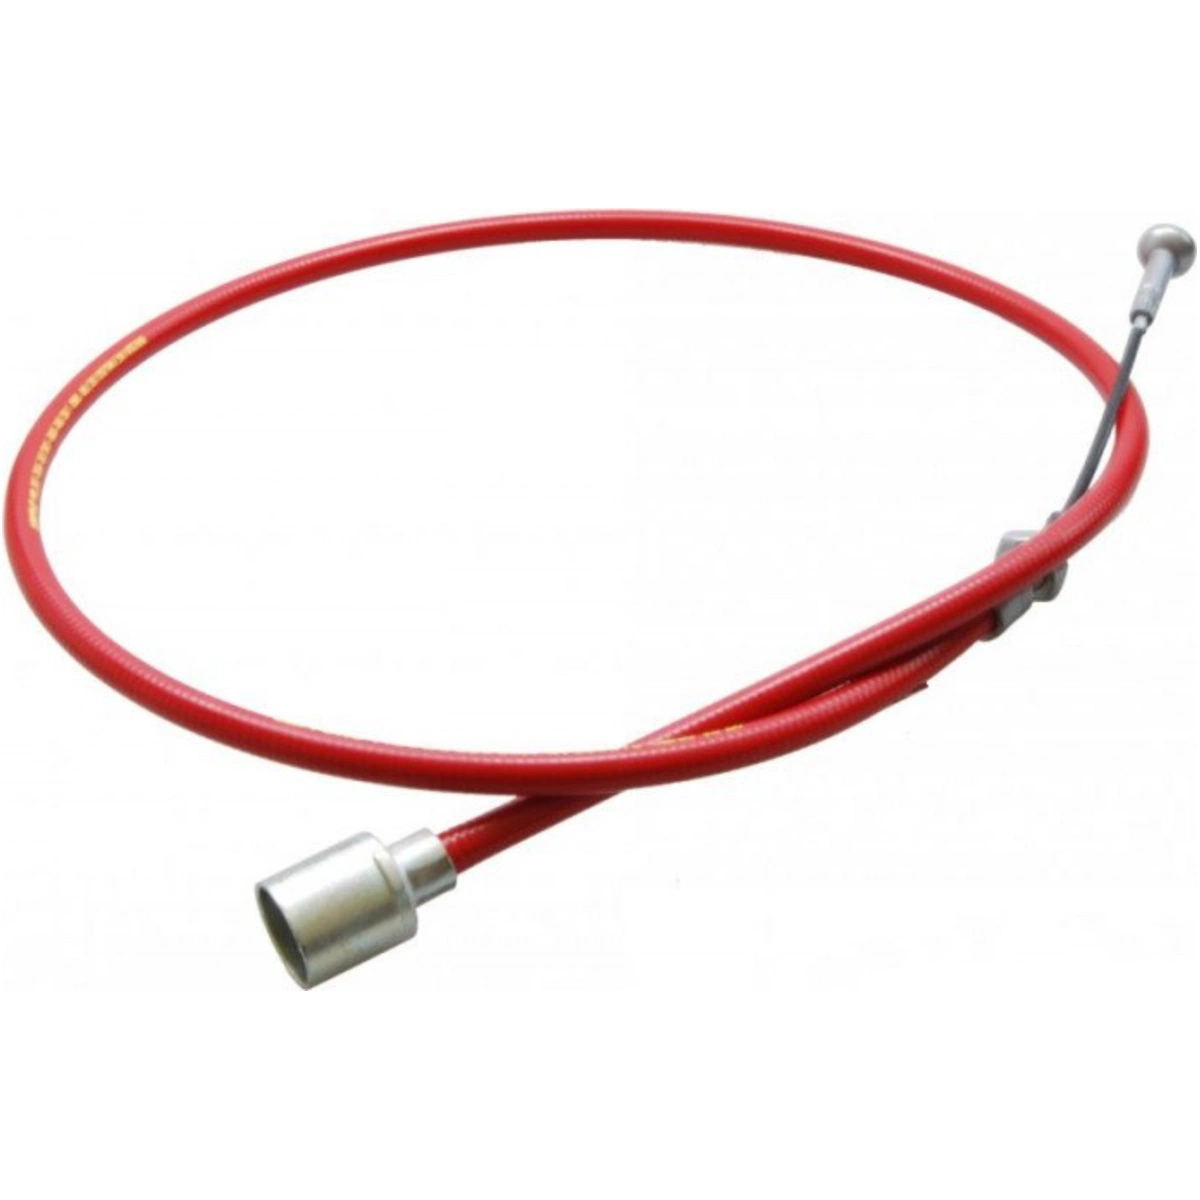 2 STAINLESS STEEL Trailer Brake Cable For ALKO AL-KO Axles Outer Sheath 1030mm